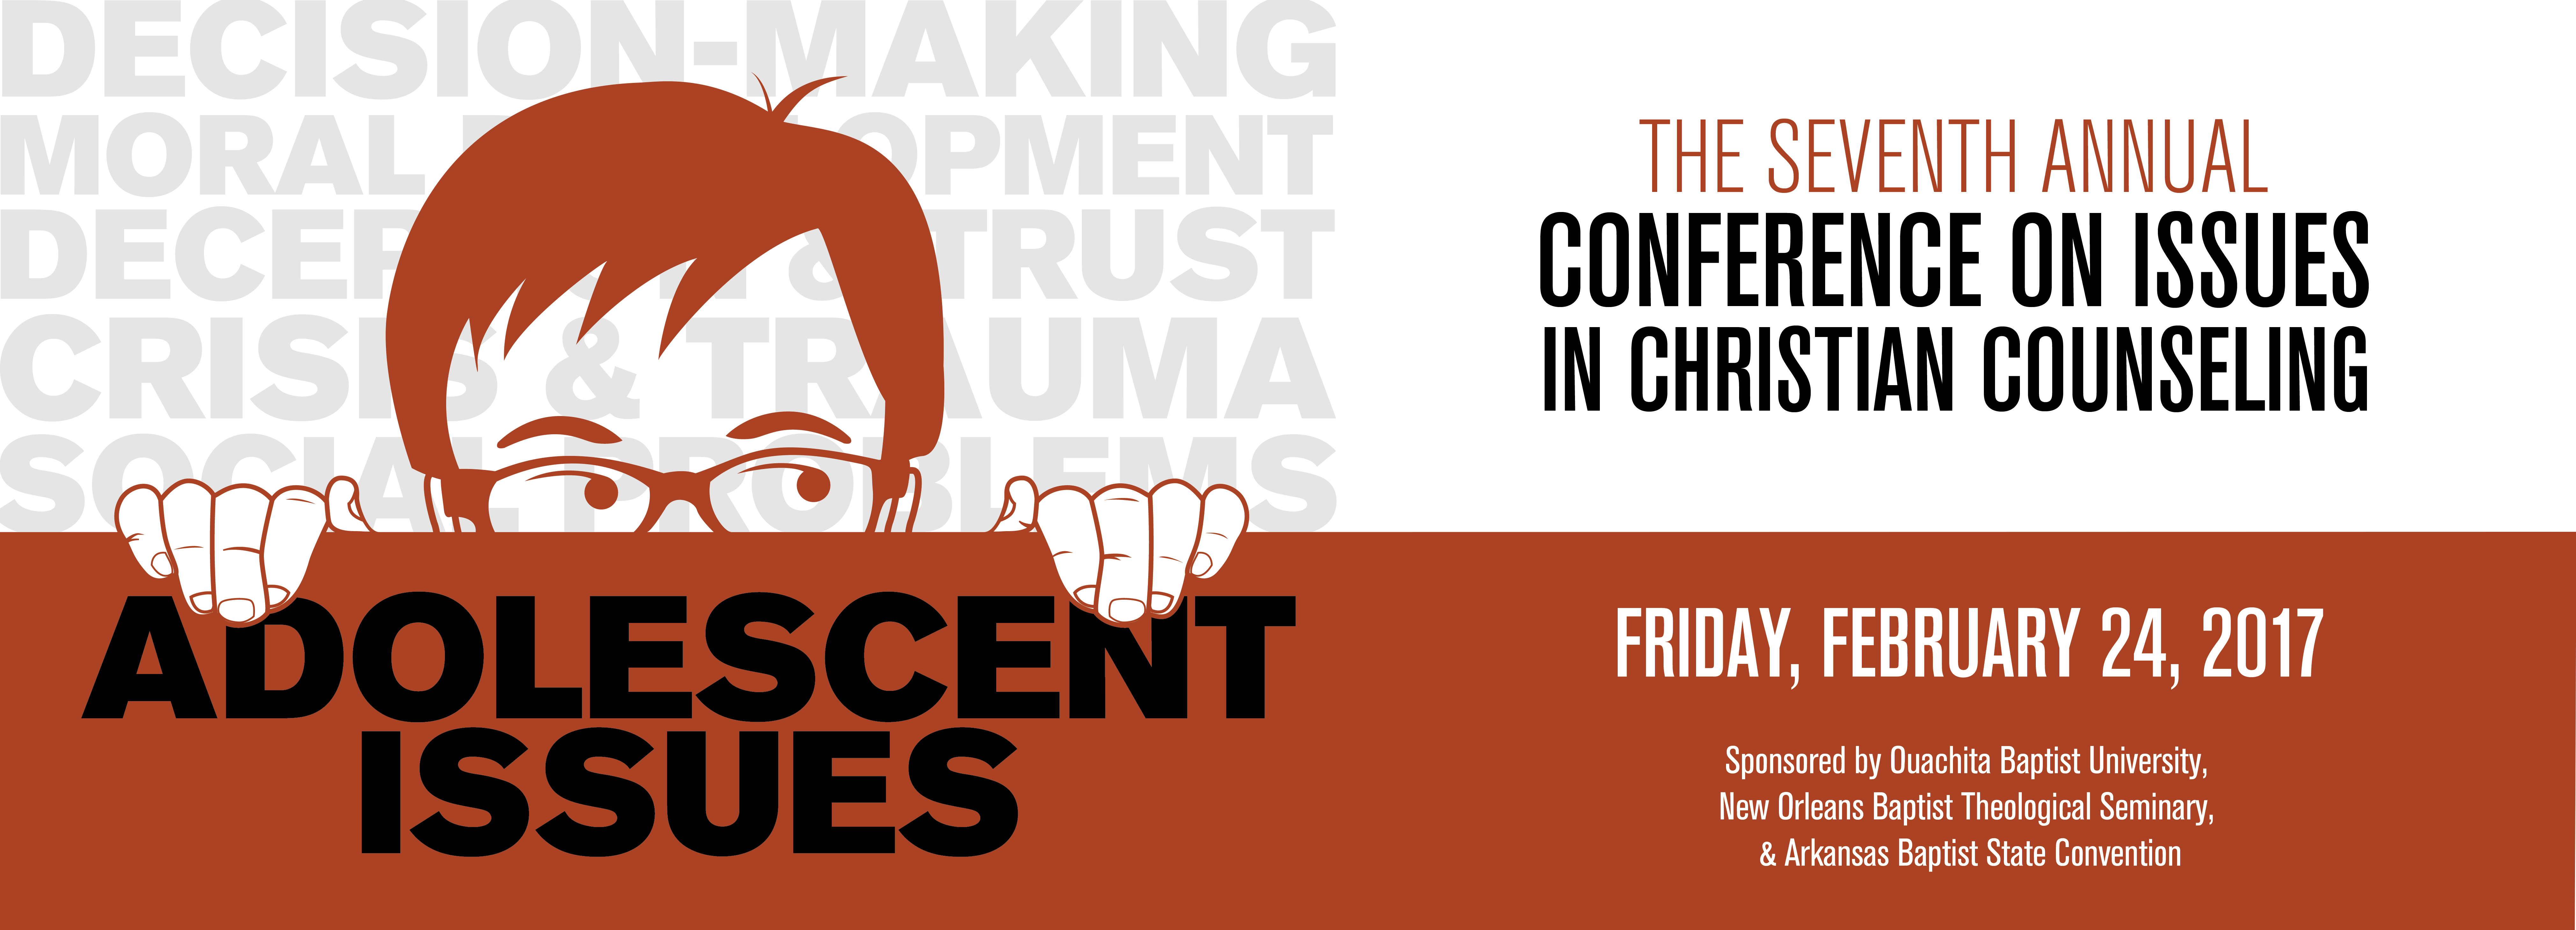 Conference on Issues in Christian Counseling to address “Adolescent Issues” Feb. 24 at Ouachita.